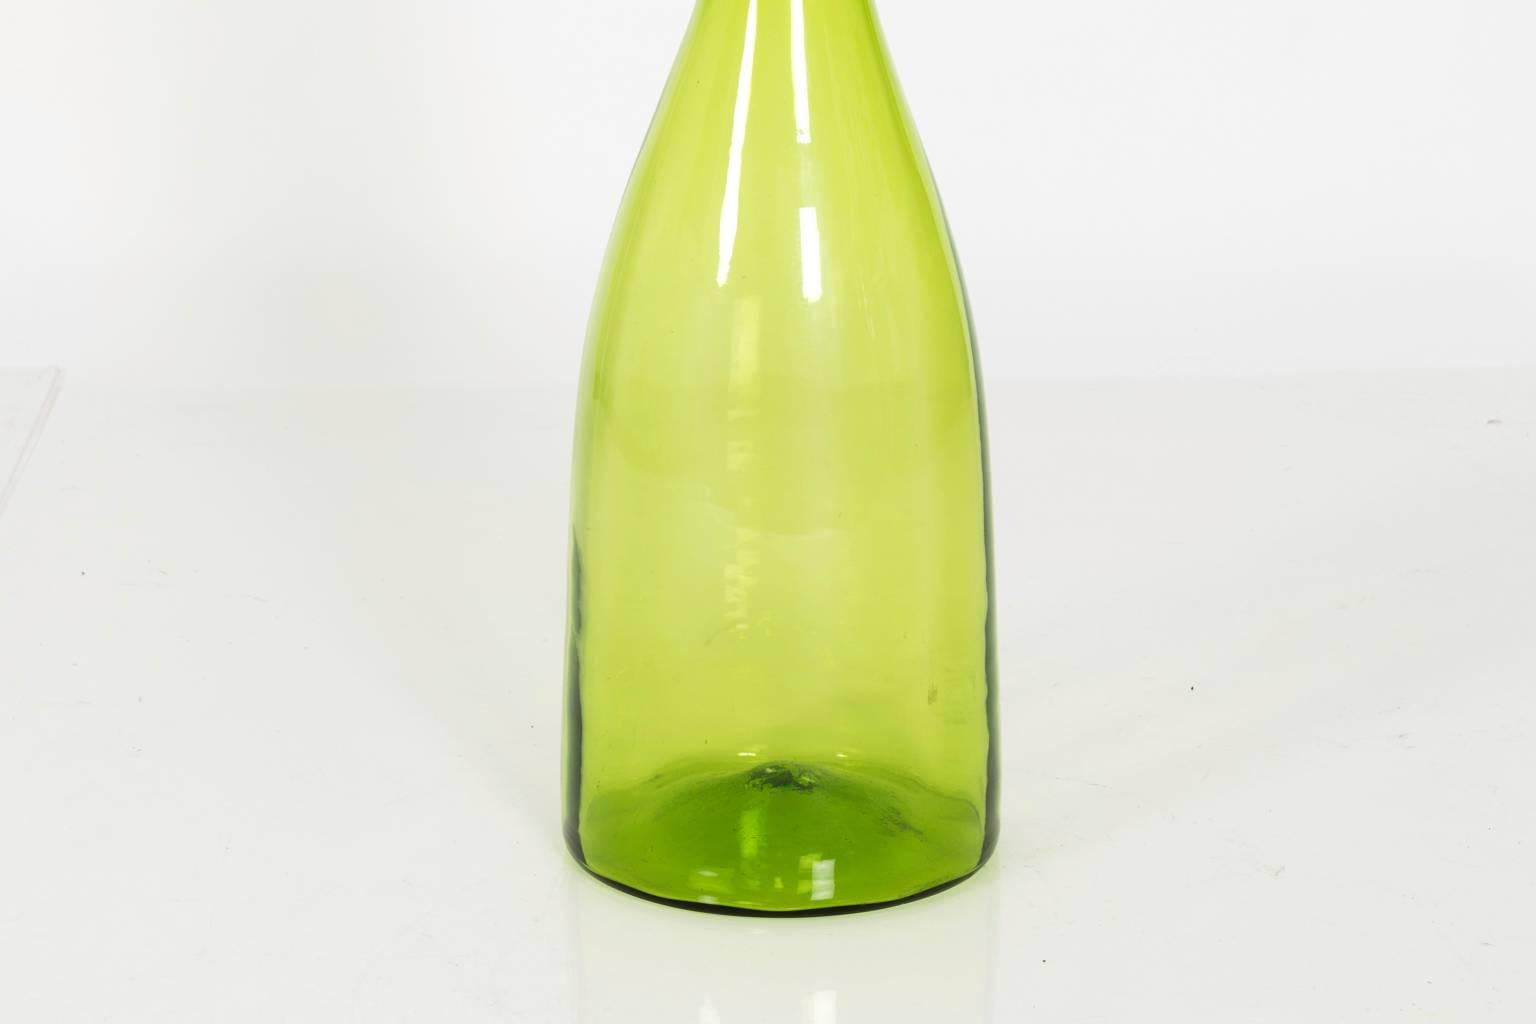 Handblown Blenko glass vase with a pointed stopper, circa 1970s.